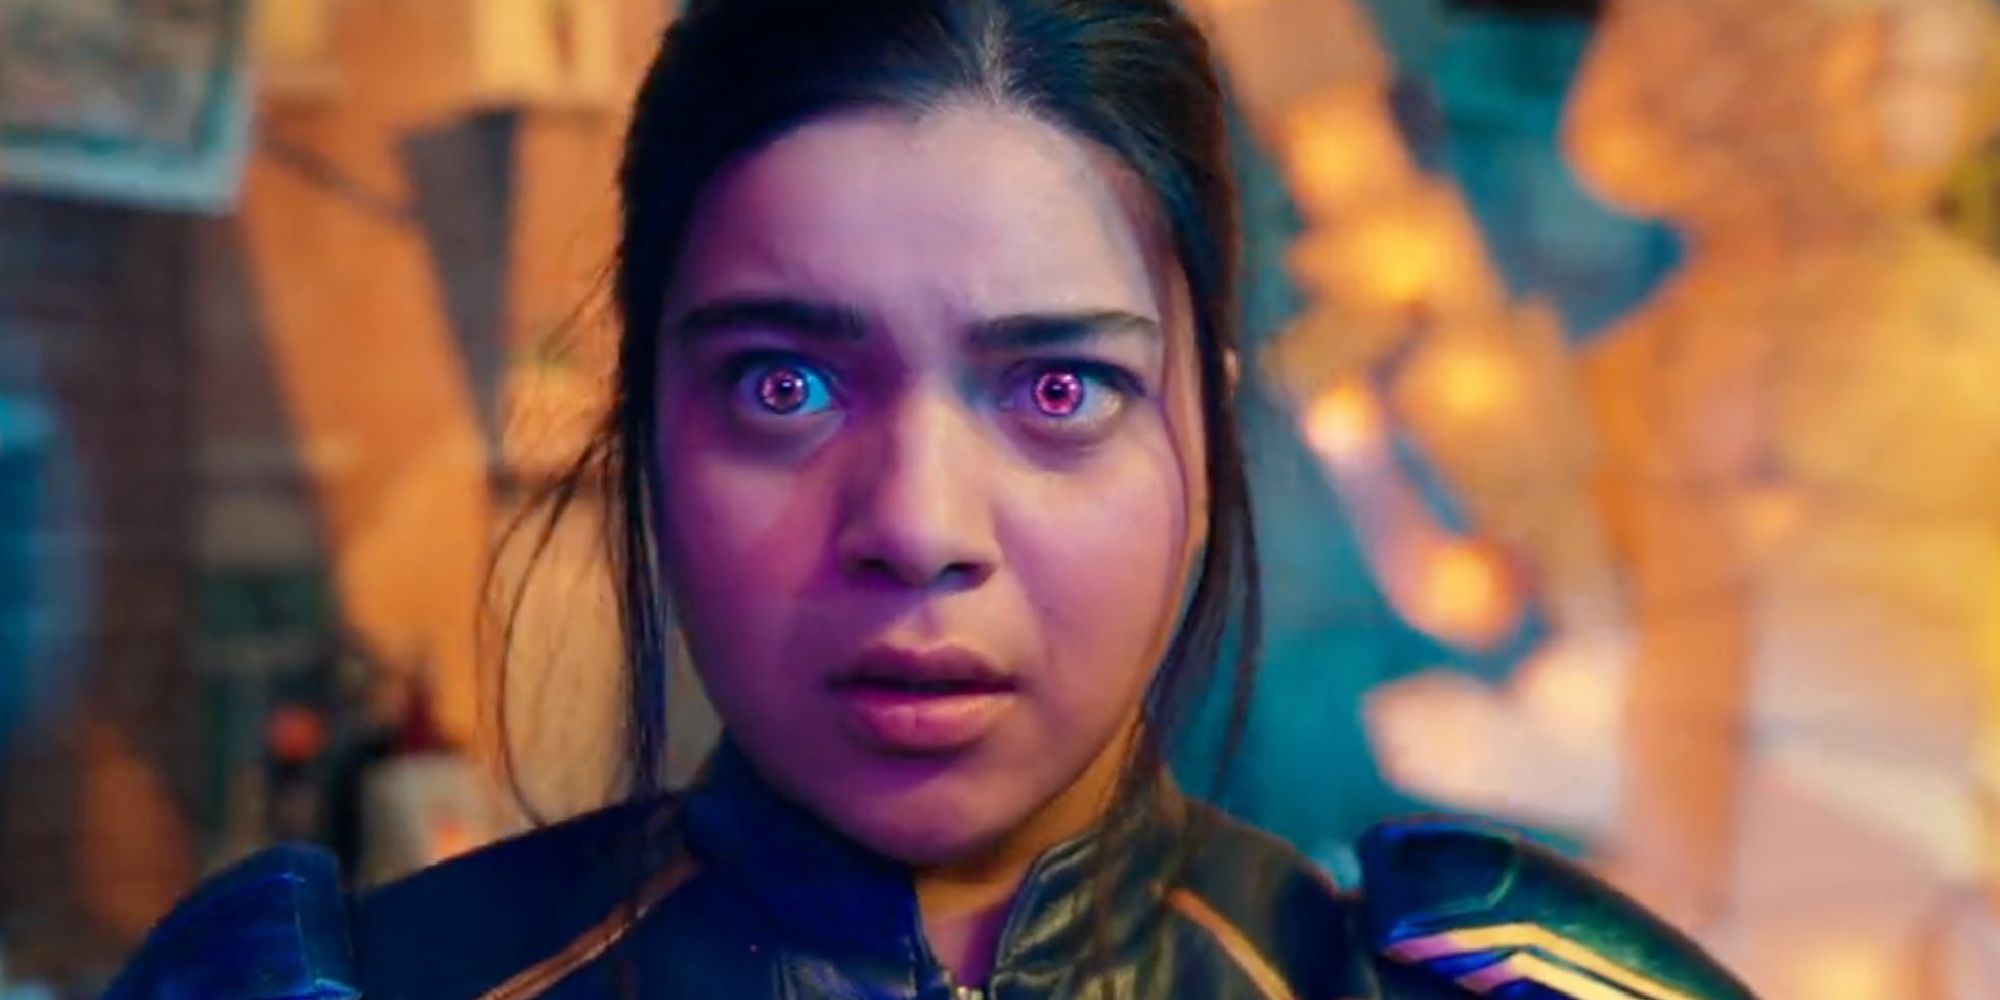 Kamala Khan's eyes growing red after gaining her powers in Ms Marvel's first episode